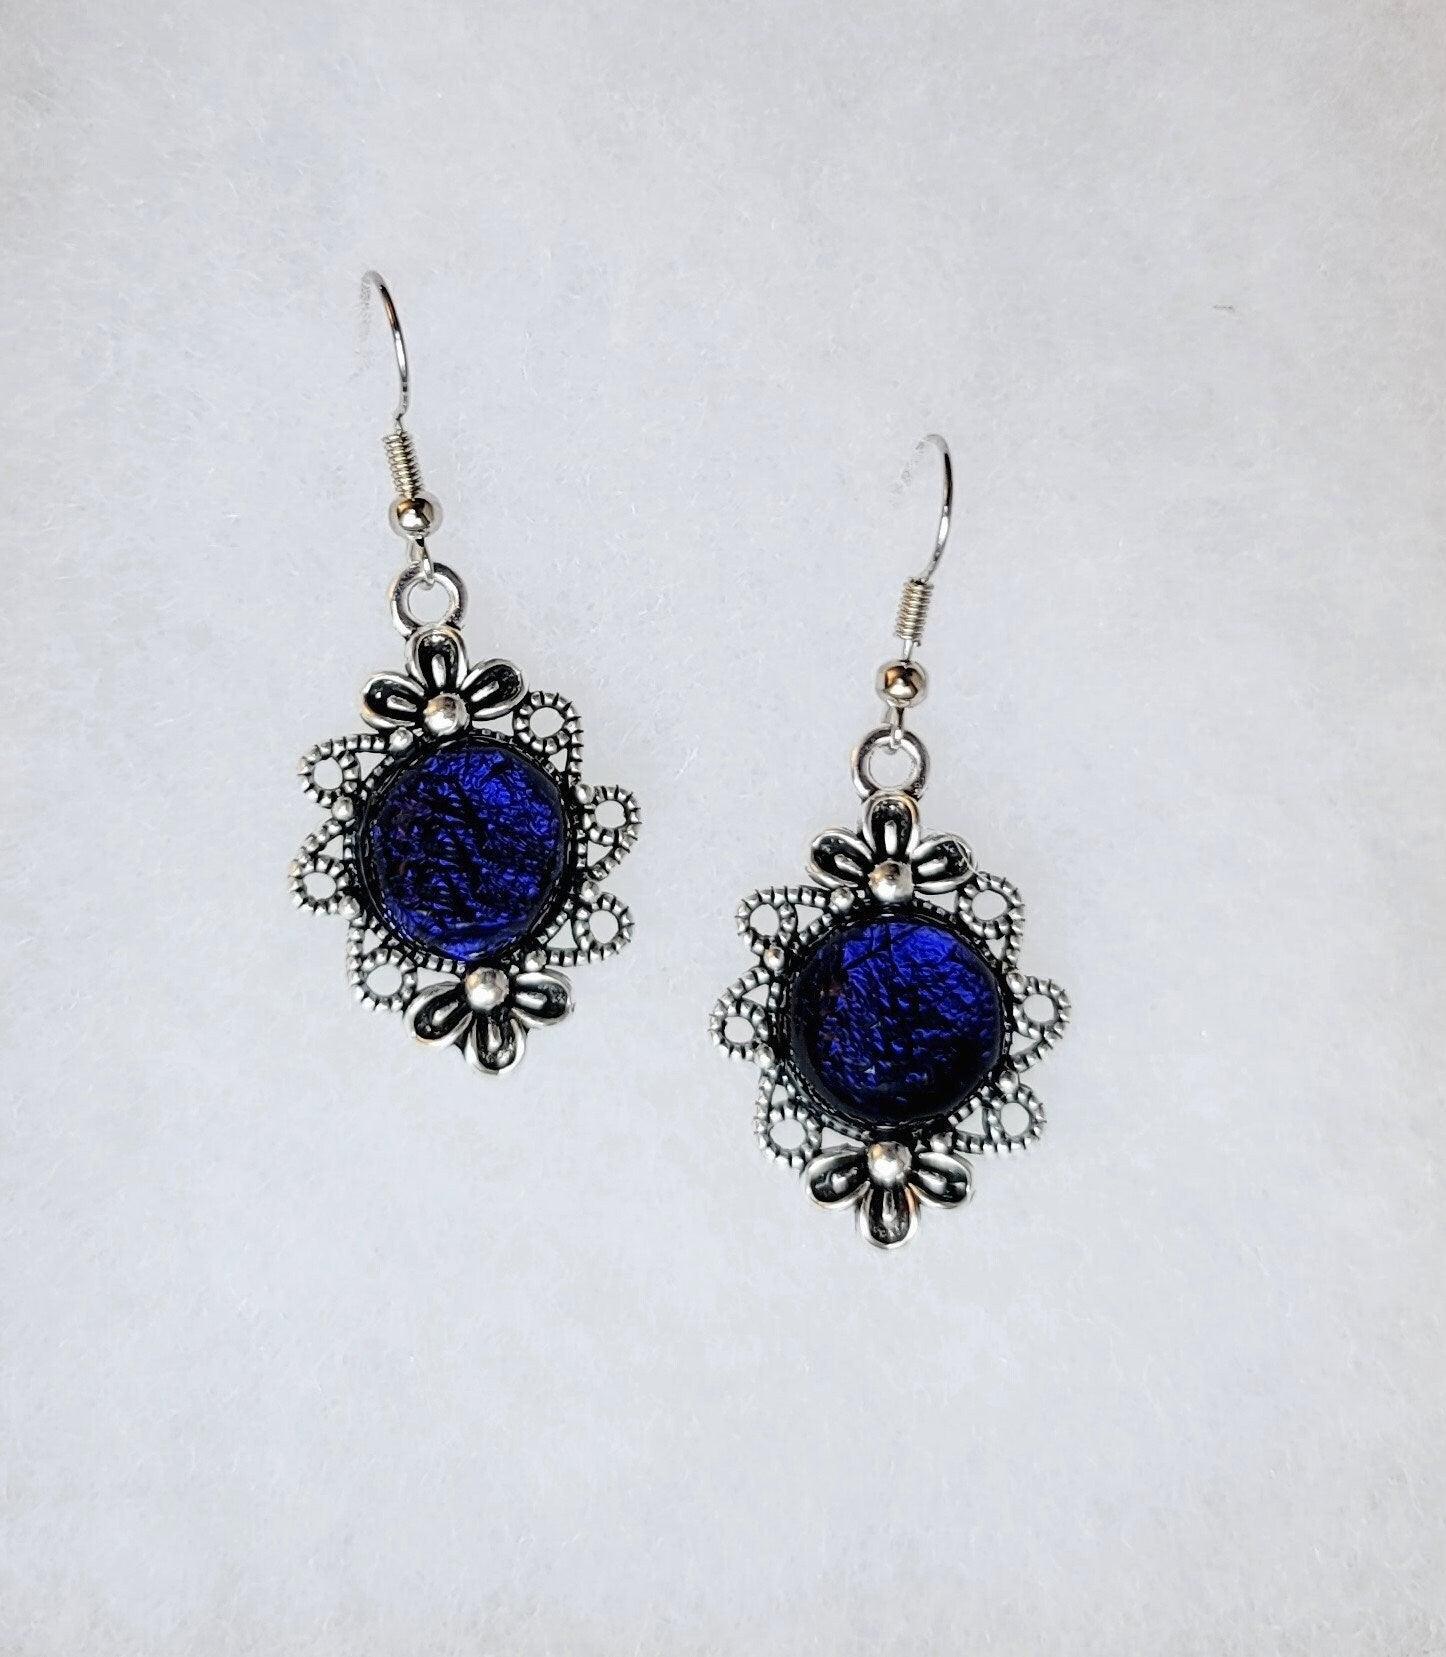 Silver tone flower earrings with dichroic dark blue fused glass cabo pierced style seedsglassworks seeds glassworks